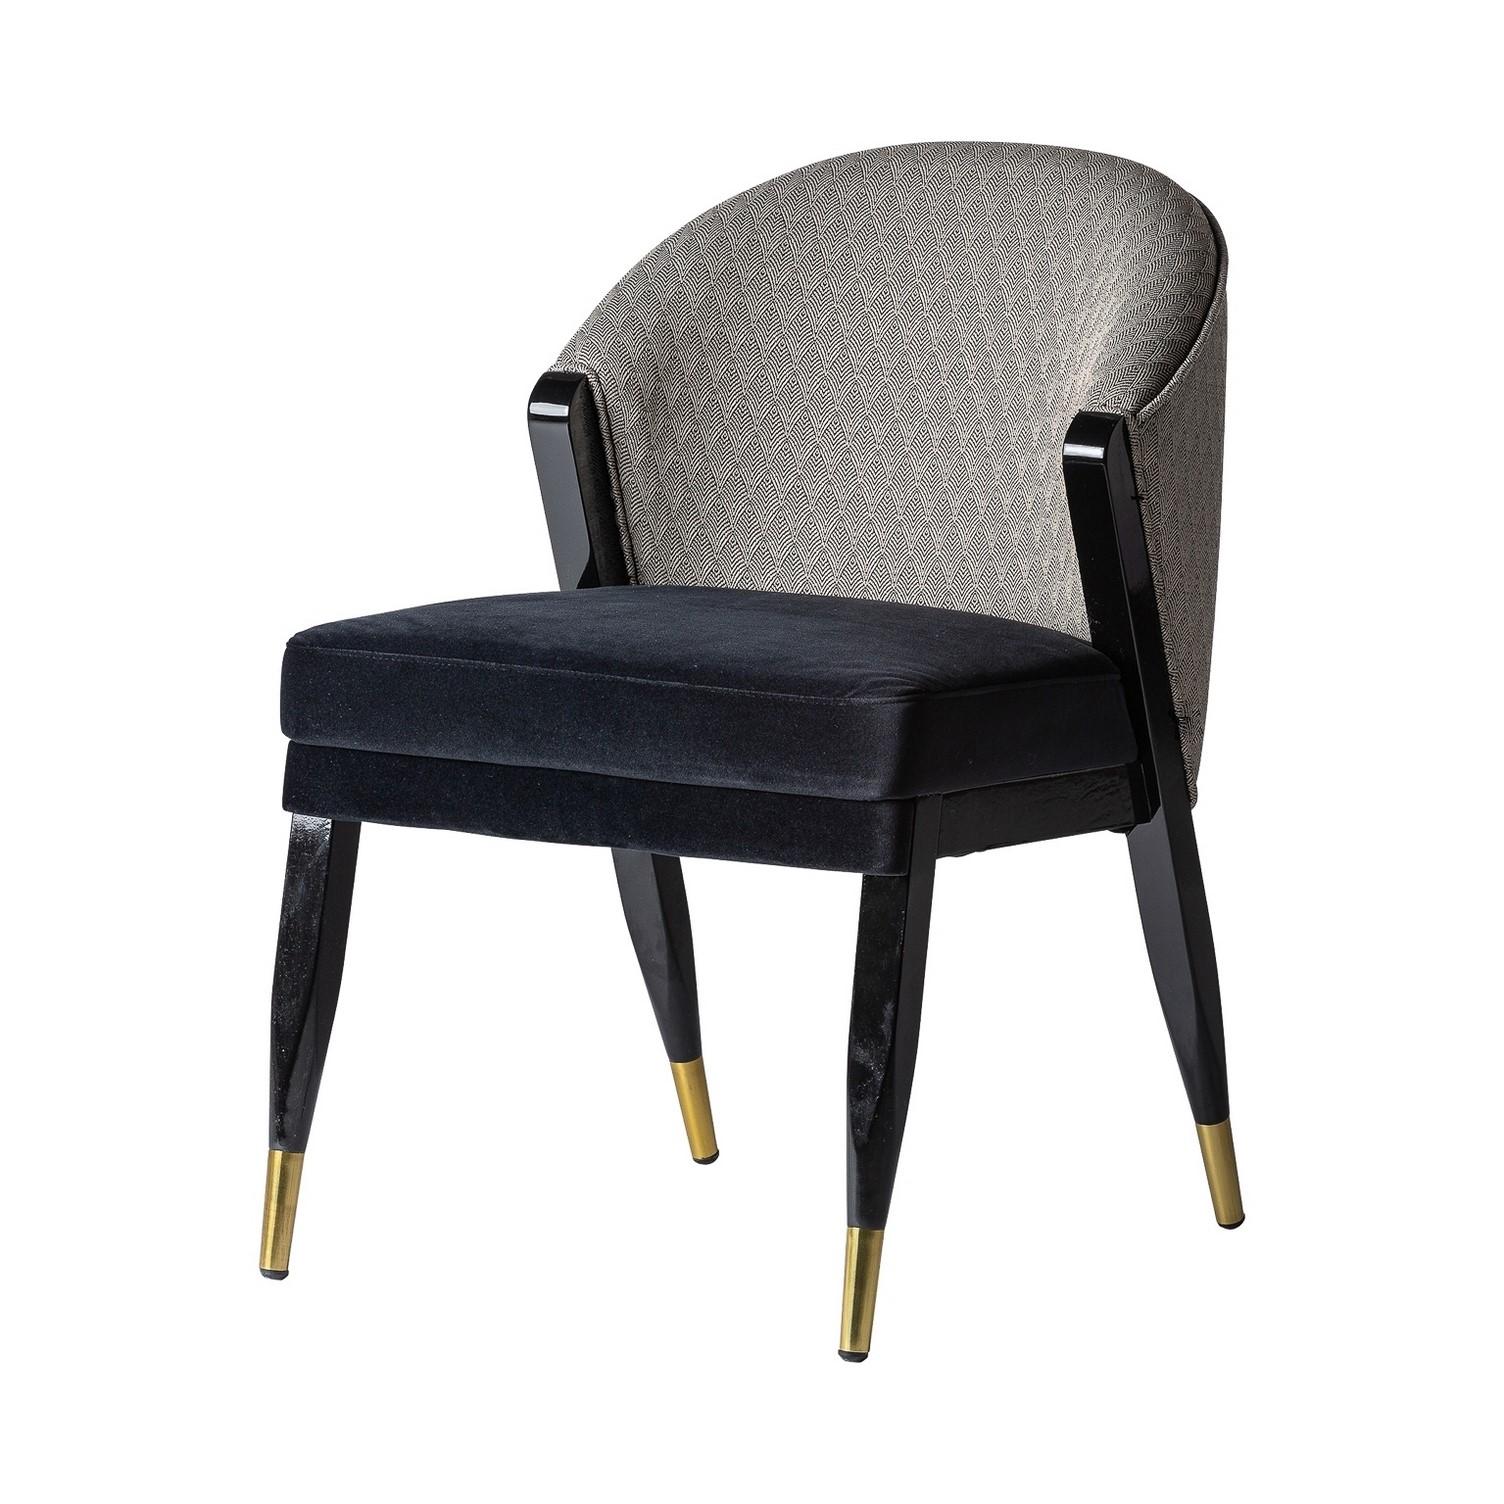 Black Lacquer Wooden With Velvet And Fabric Chair